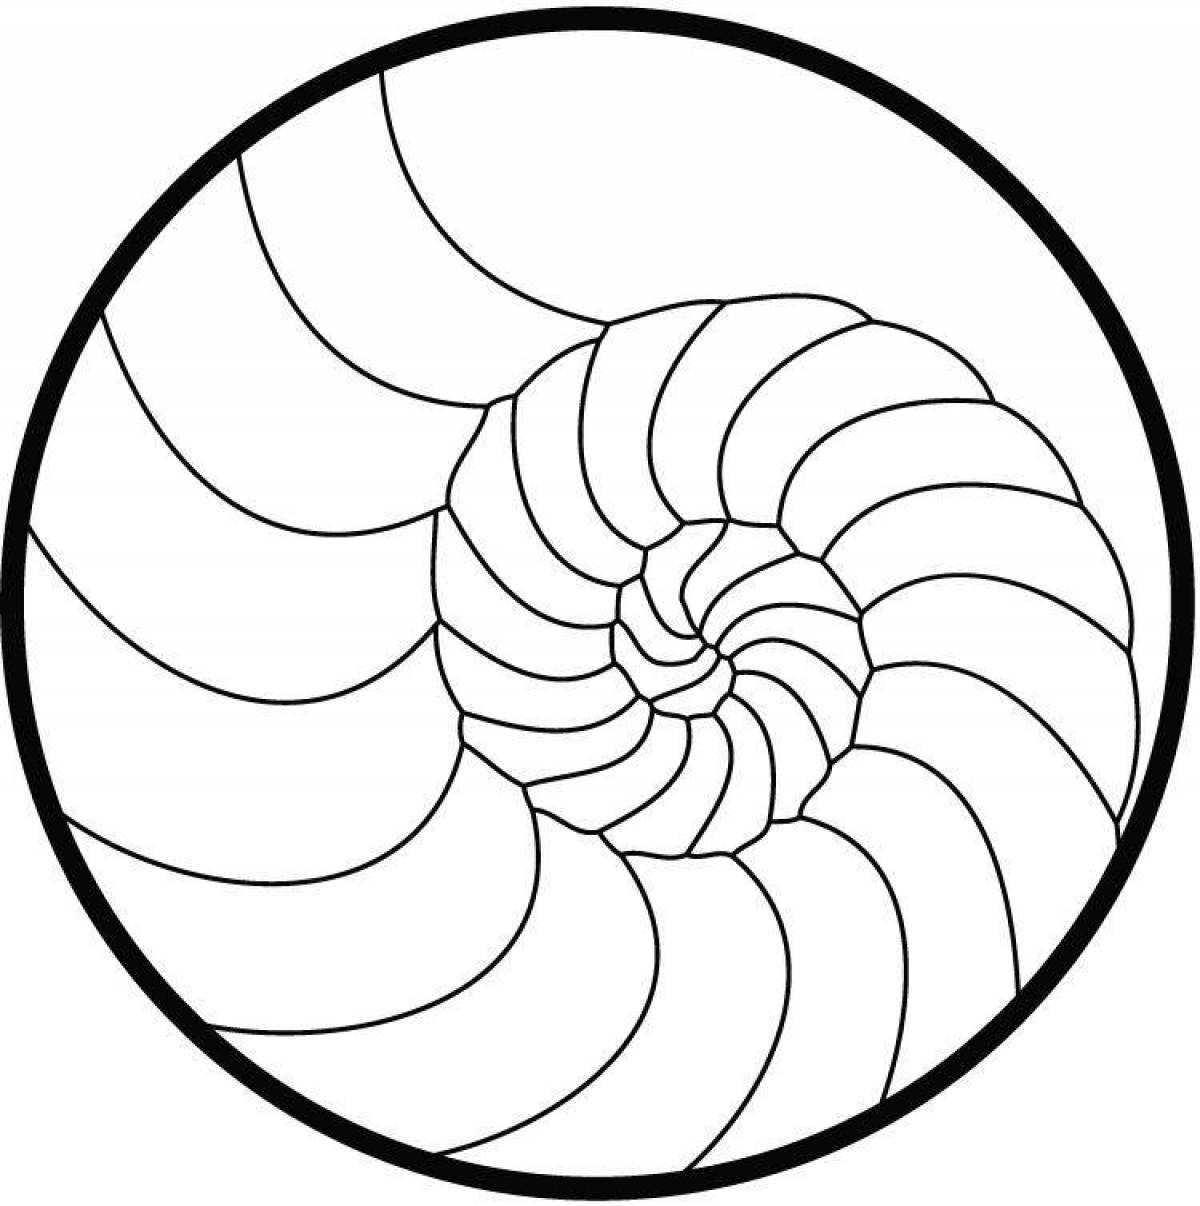 Animated spiral coloring